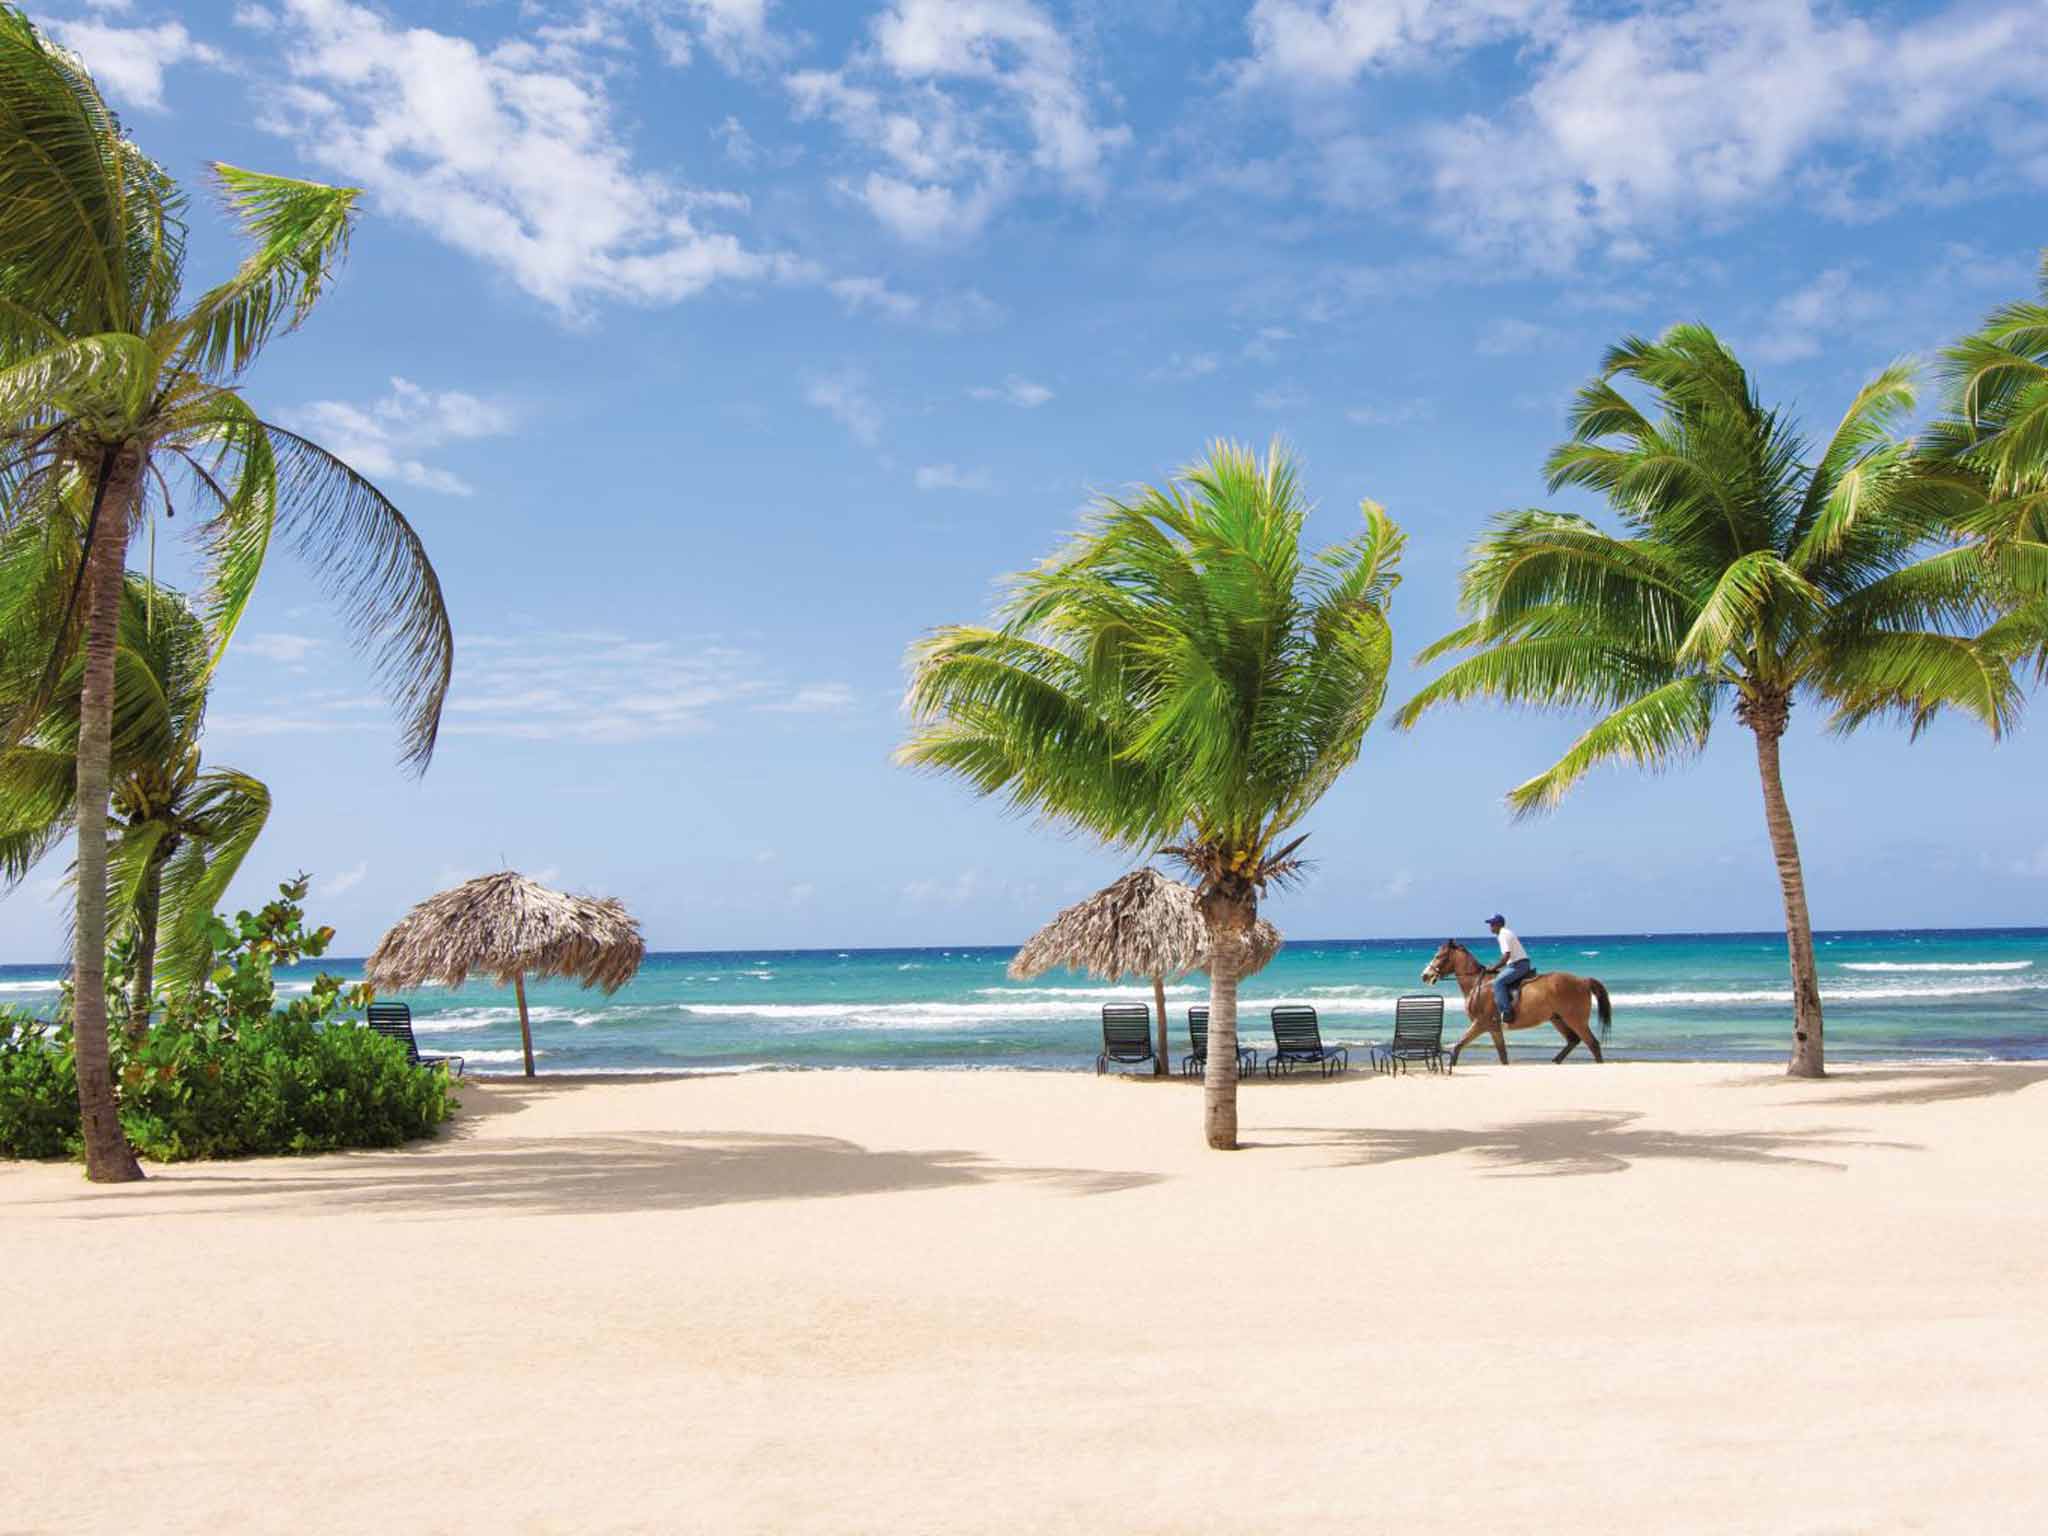 Jamaica can offer travellers more for their money